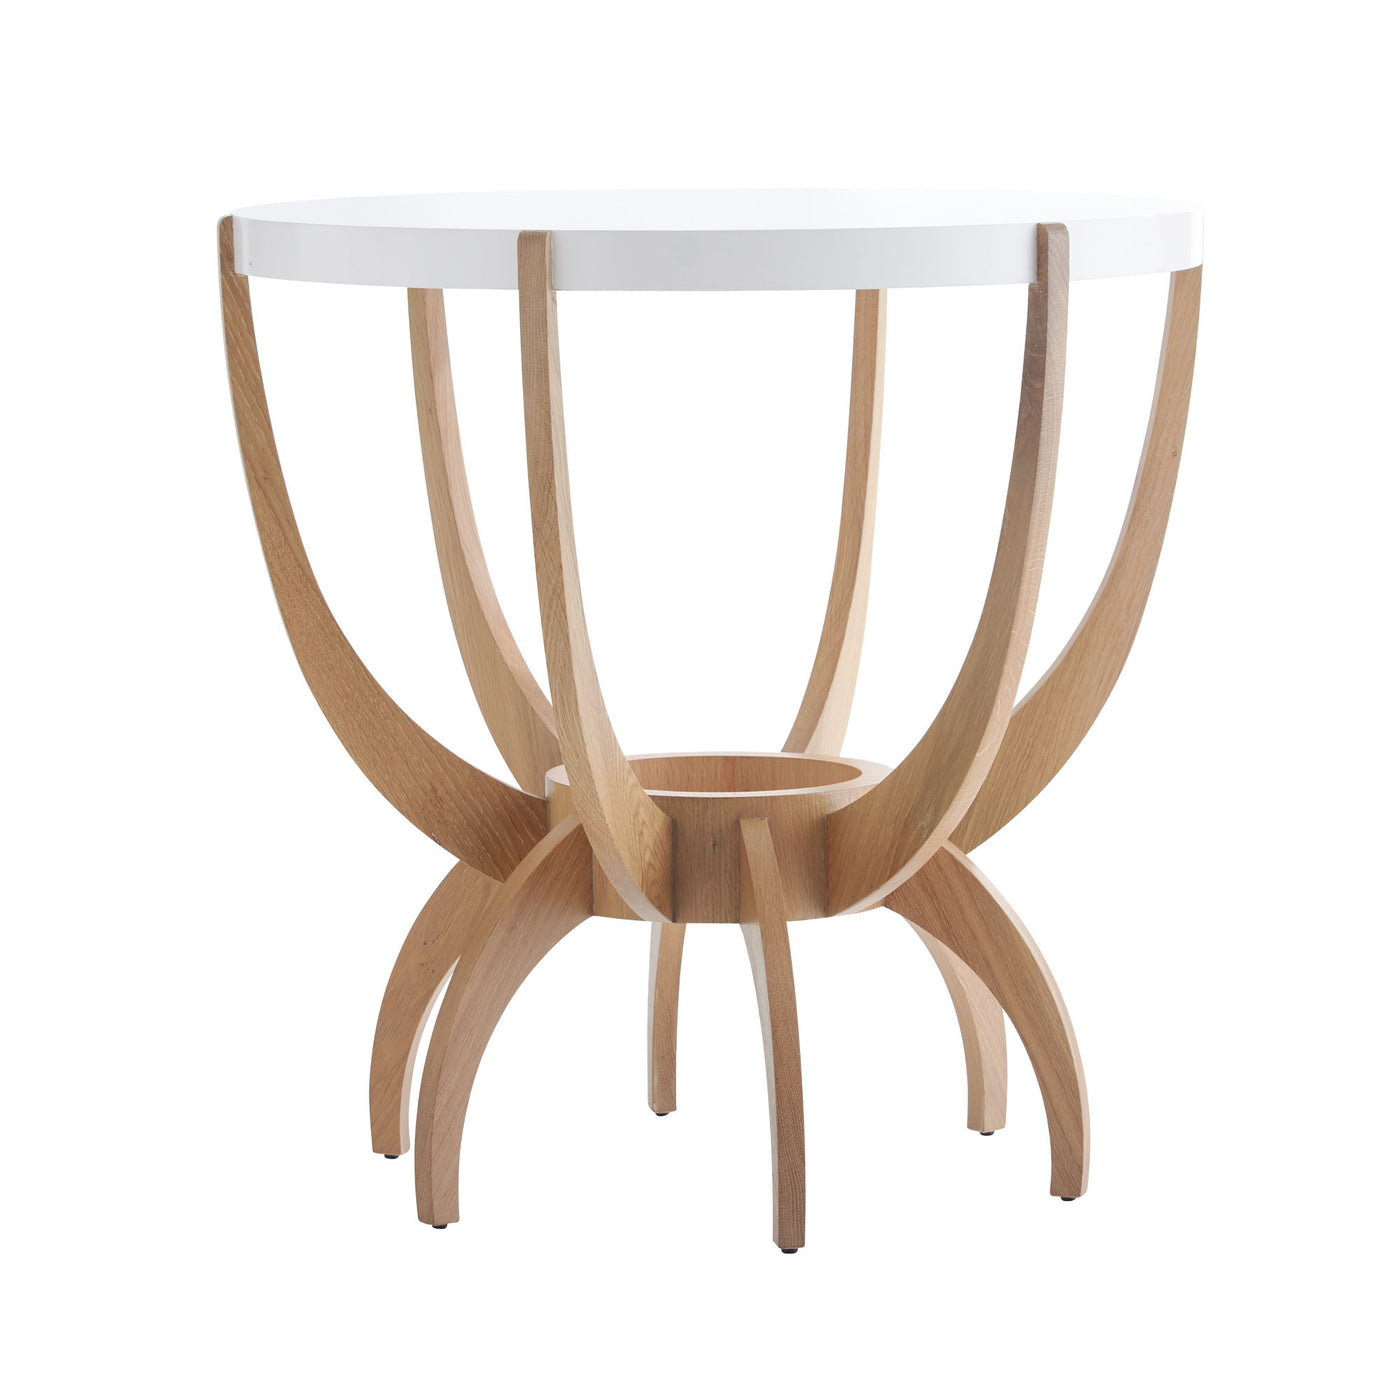 TABLE ROUND WHITE LACQUER TOP WITH OAK WOOD LEGS